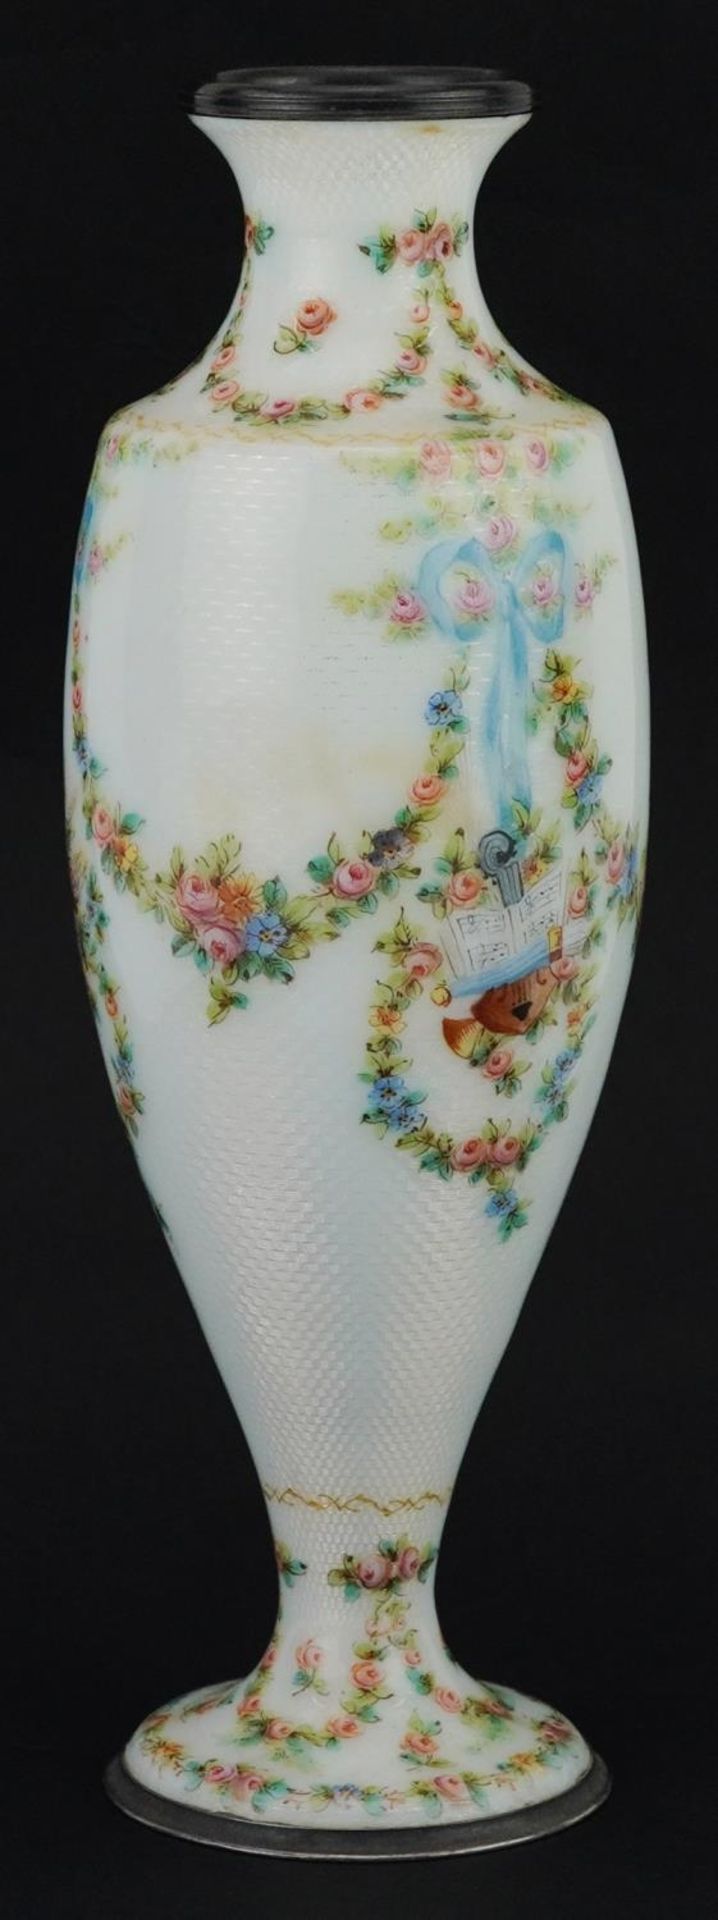 19th century French silver and white guilloche enamel vase finely hand painted with swags, ribbons - Image 2 of 10